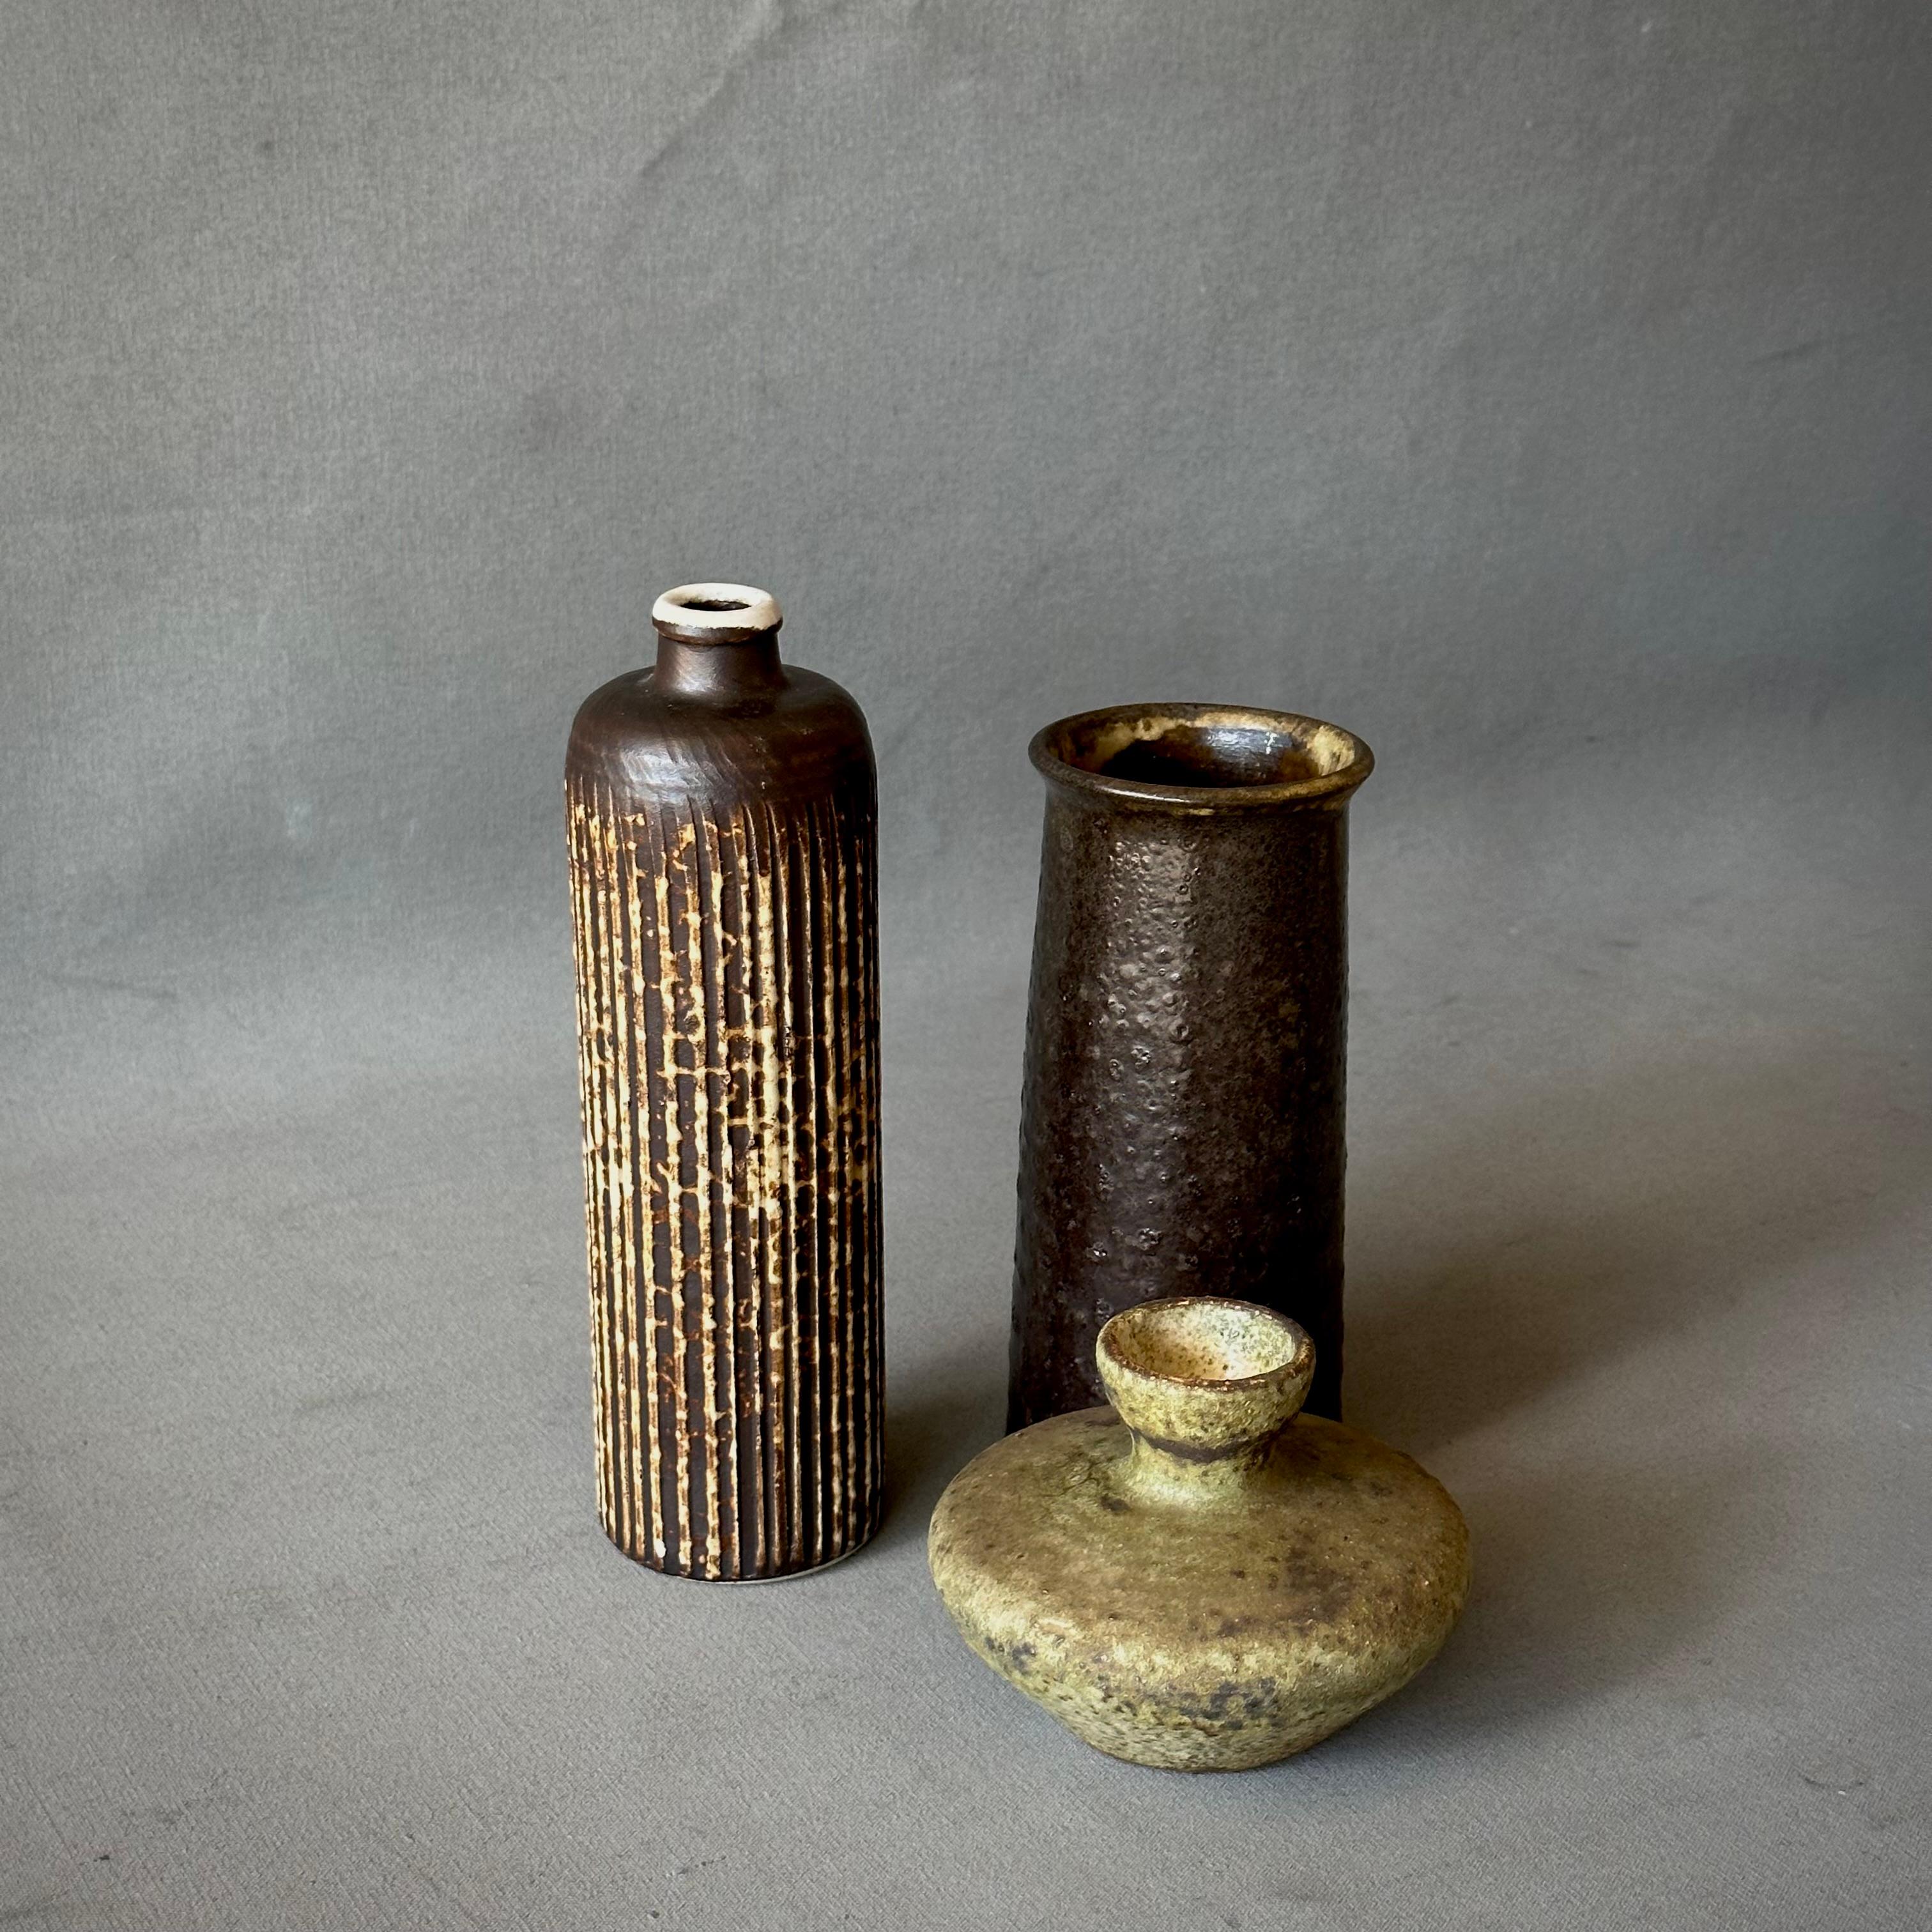 A collection of three studio pottery vases in earthy browns.

Belgium,circa 1970

Largest Dimensions: 4W x 4D x 8H